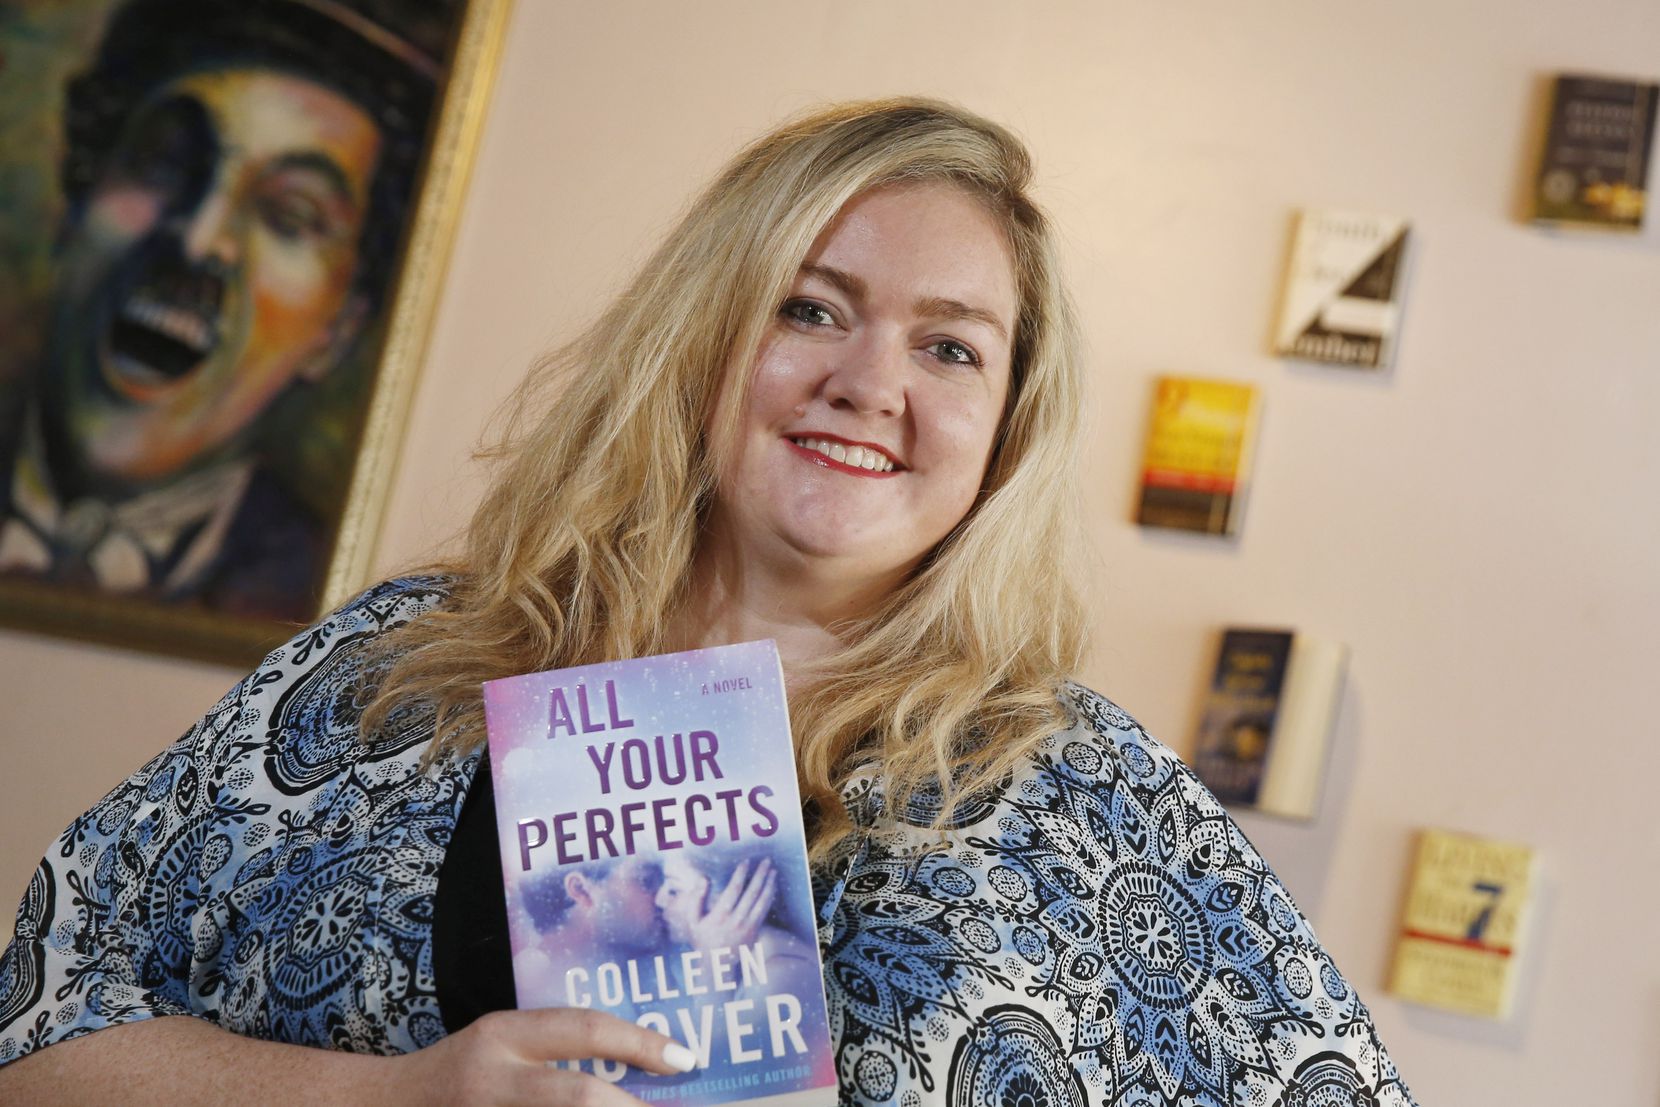 Colleen Hoover discusses her astonishing, accidental literary